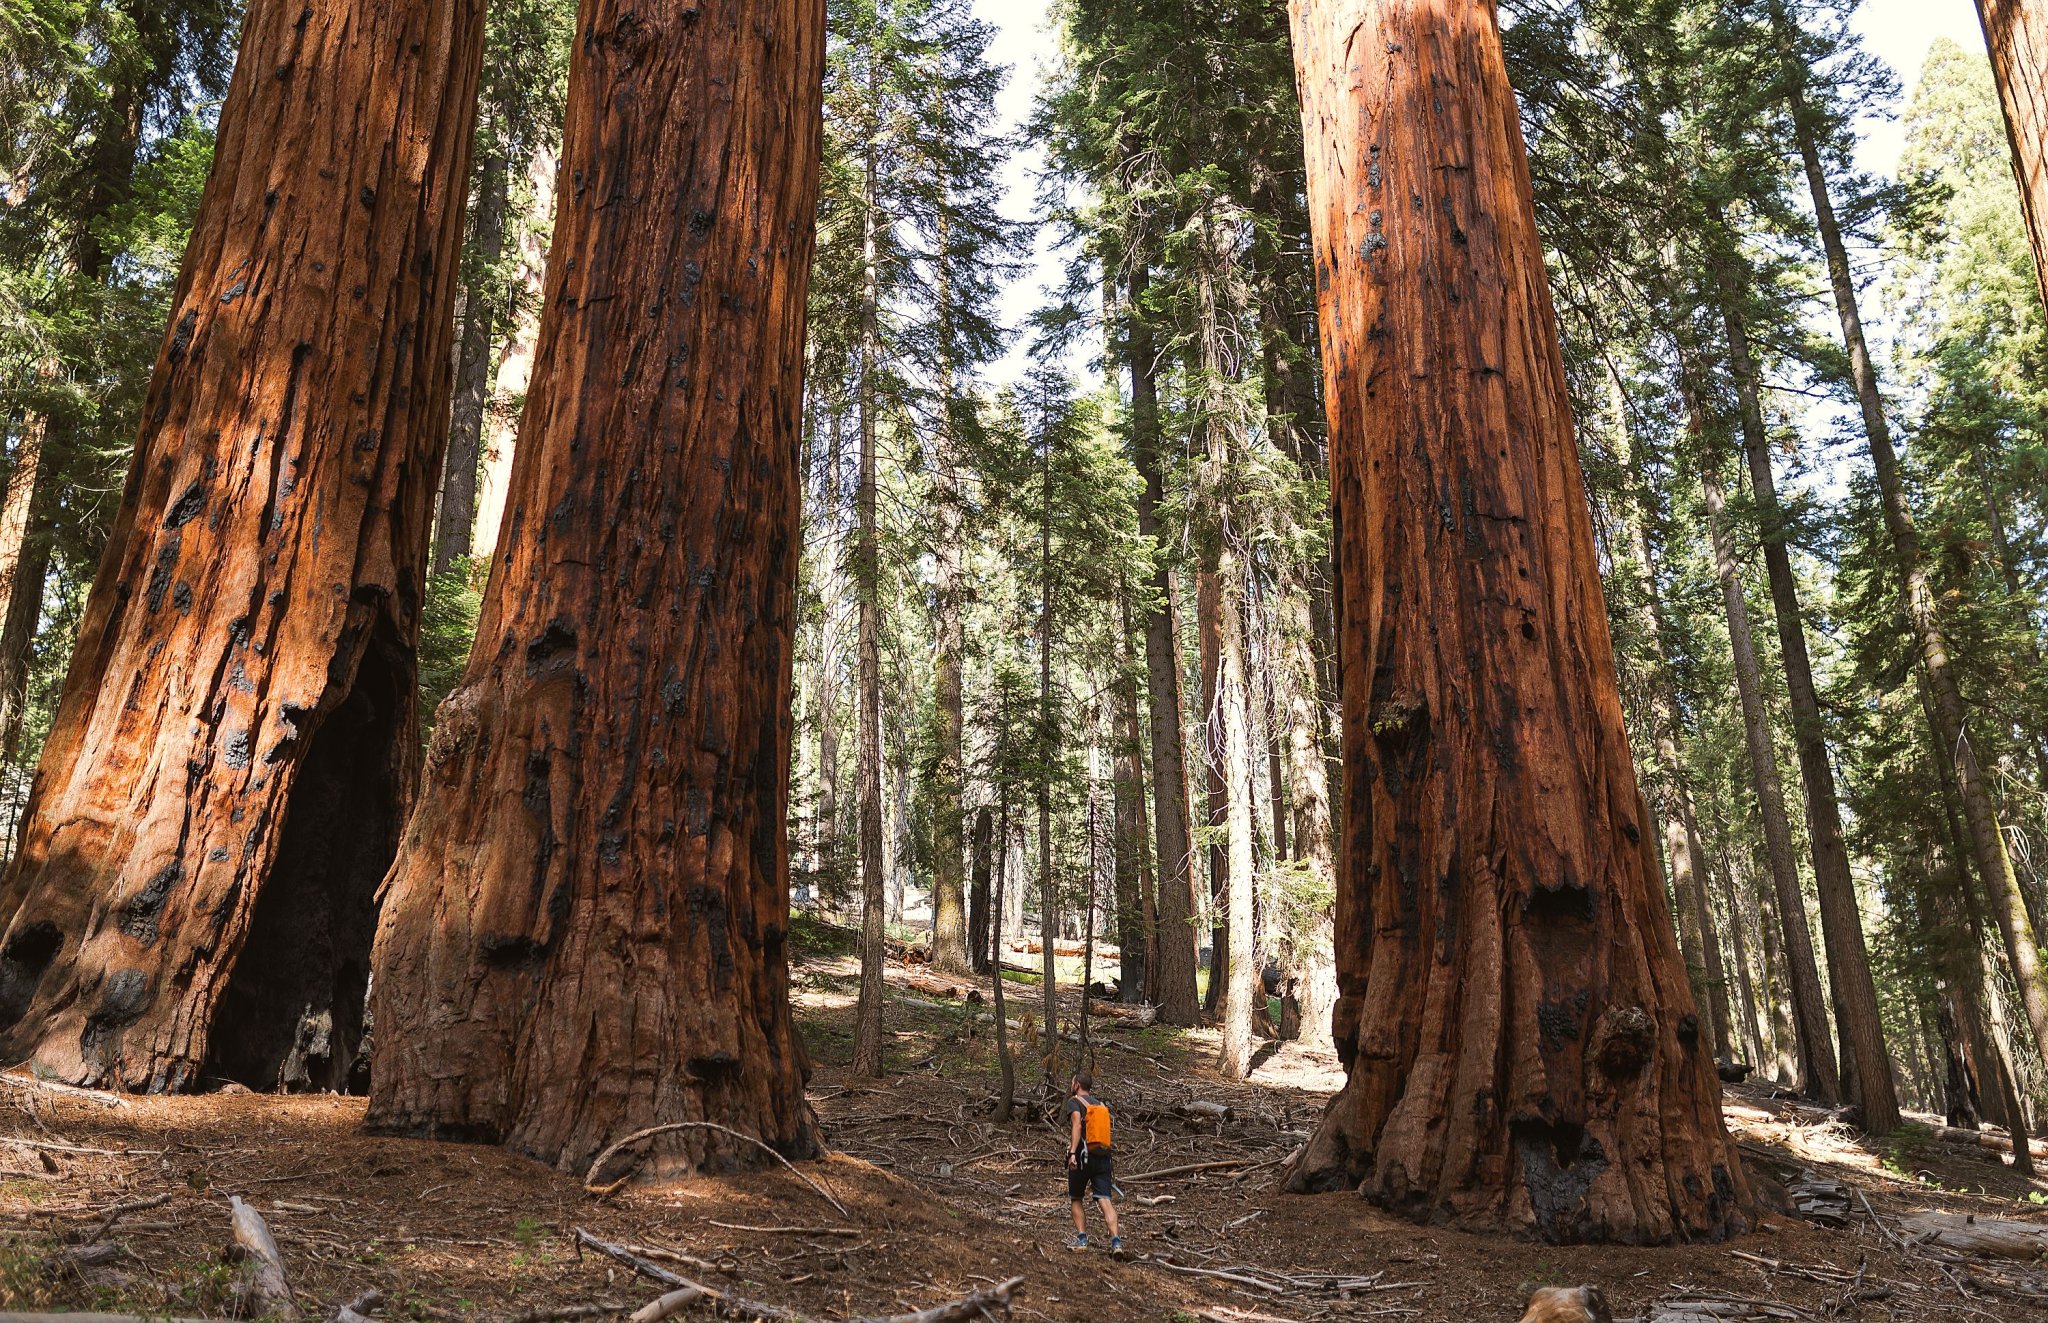 10 of the Tallest Trees in the World